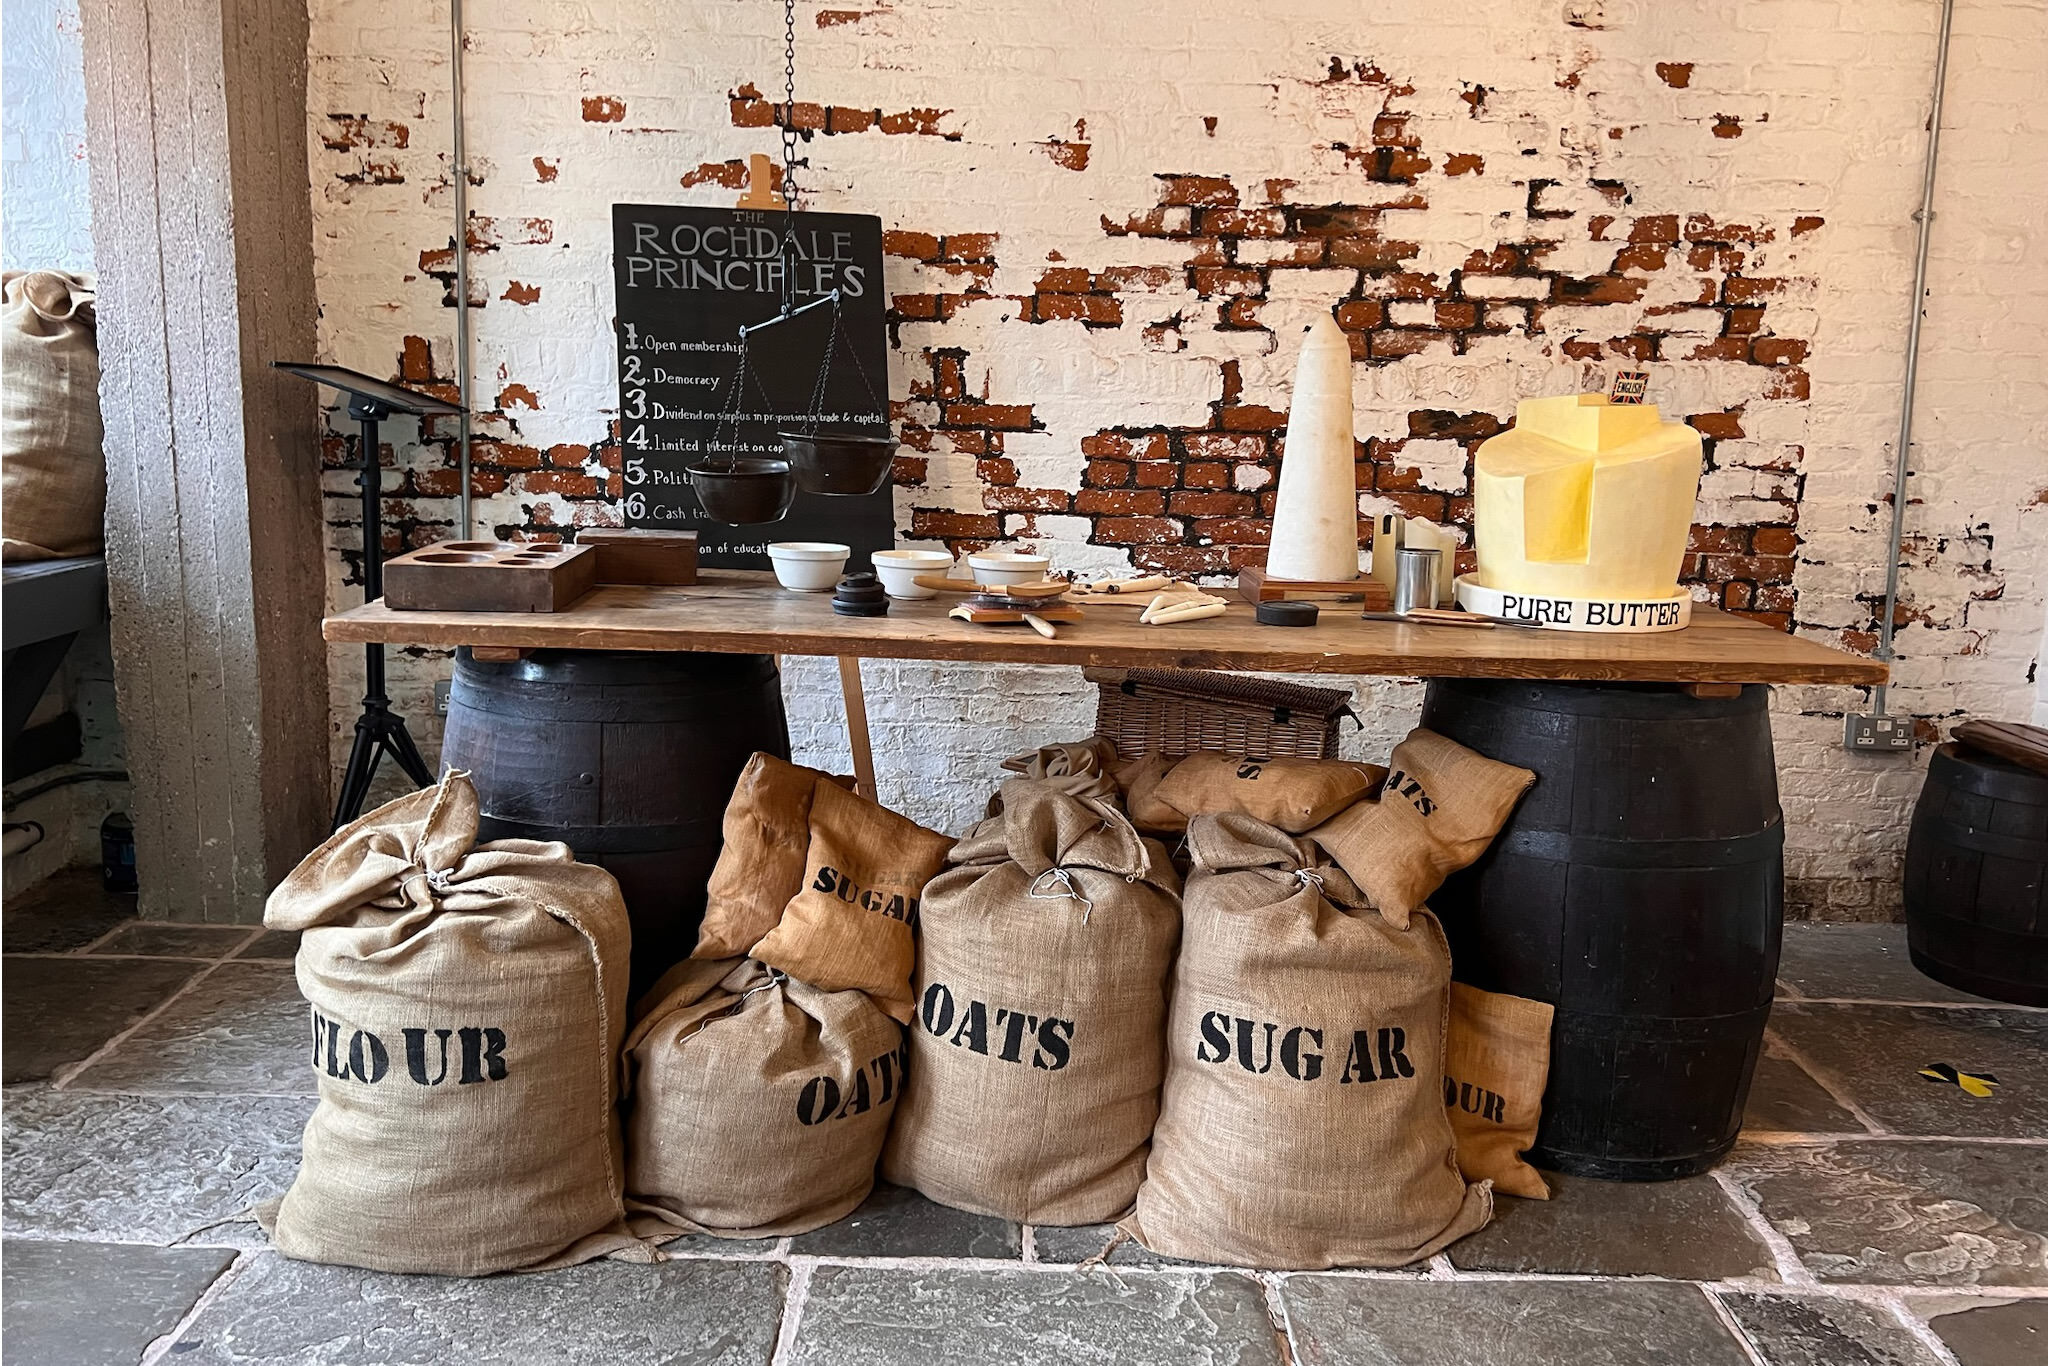 An improvised table with a wooden plank over two barrels, butter on top, sacks of flour, sugar and oats on the floor. It’s a scene from the Rochdale Pioneers Museum, mimicking the appearance of the first Pioneers store in 1844 at Toad Lane, Rochdale.